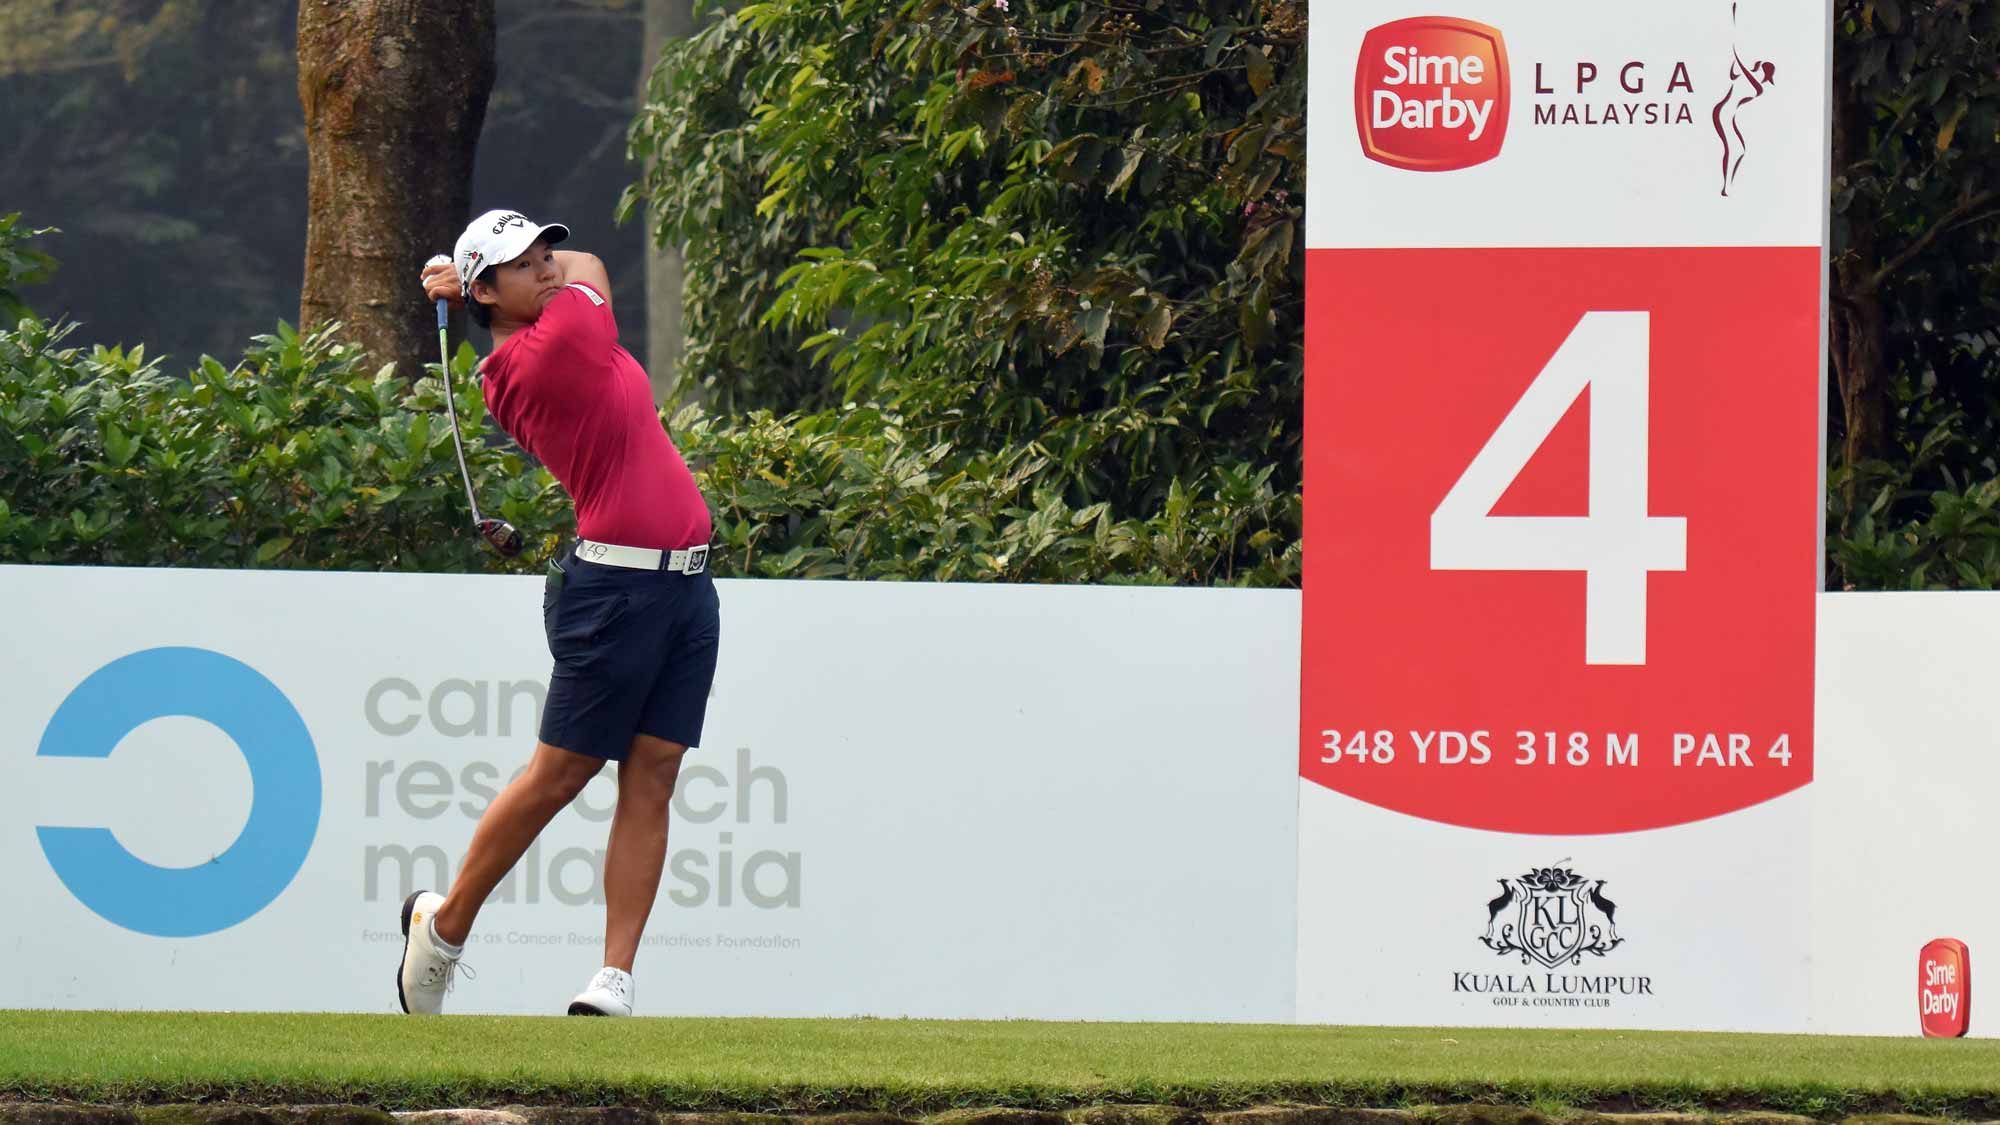 Yani Tseng of Chinese Taipei plays on the 4th hole during the final round of the Sime Darby LPGA Tour at Kuala Lumpur Golf & Country Club 